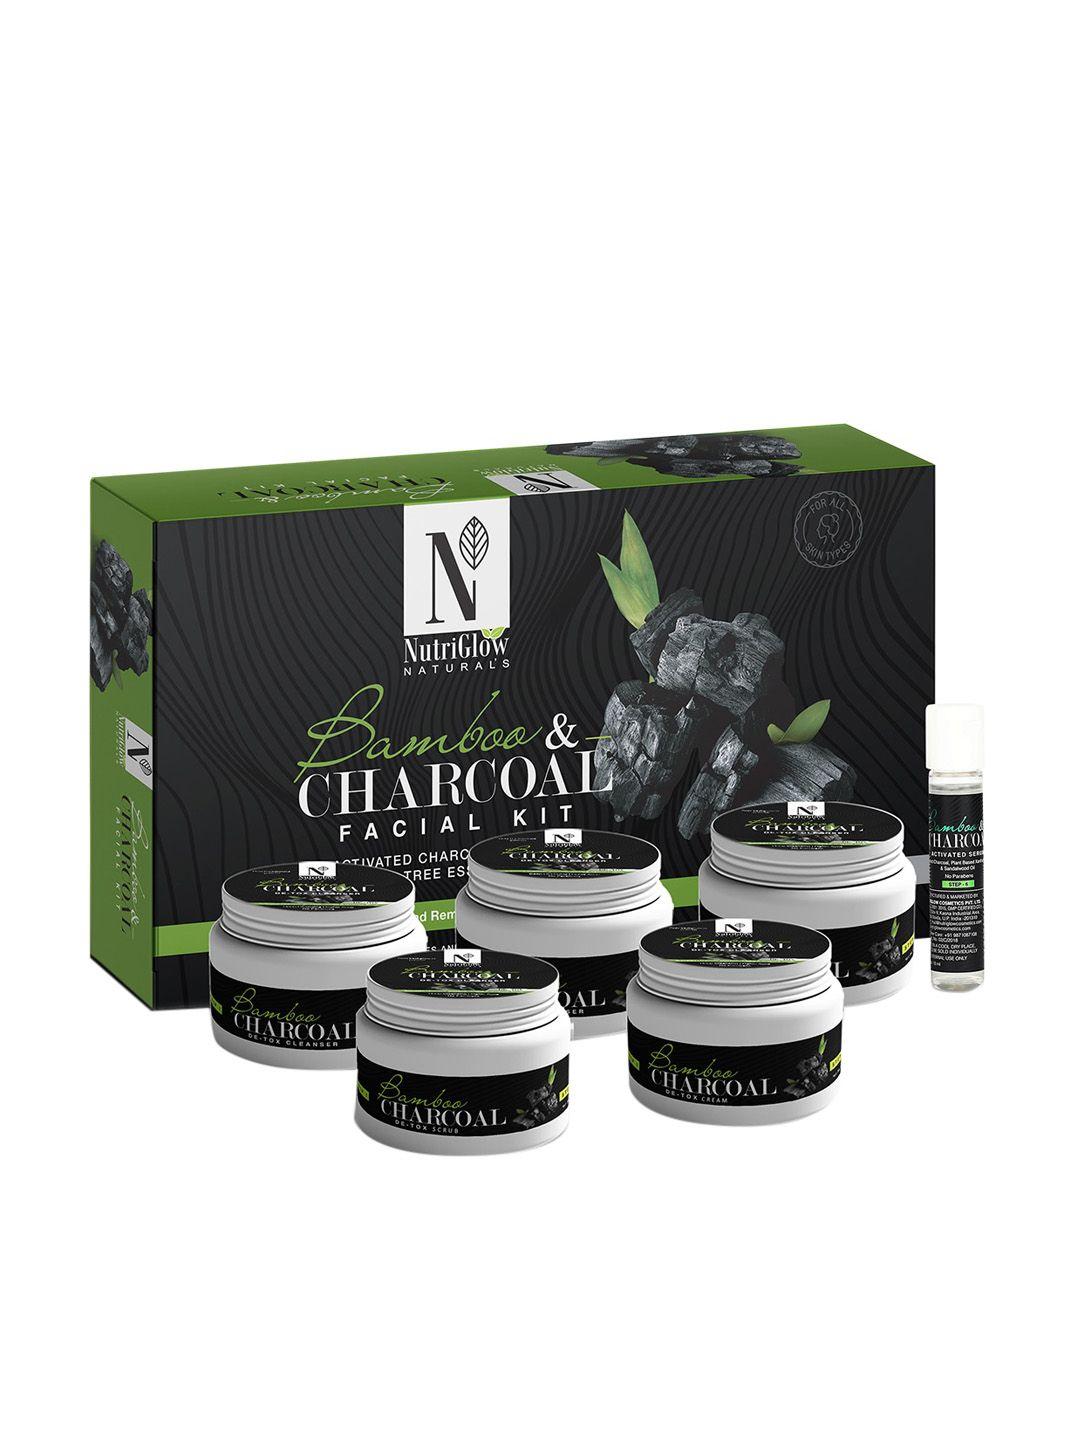 nutriglow sustainable naturals  bamboo & charcoal facial kit 250g+10ml